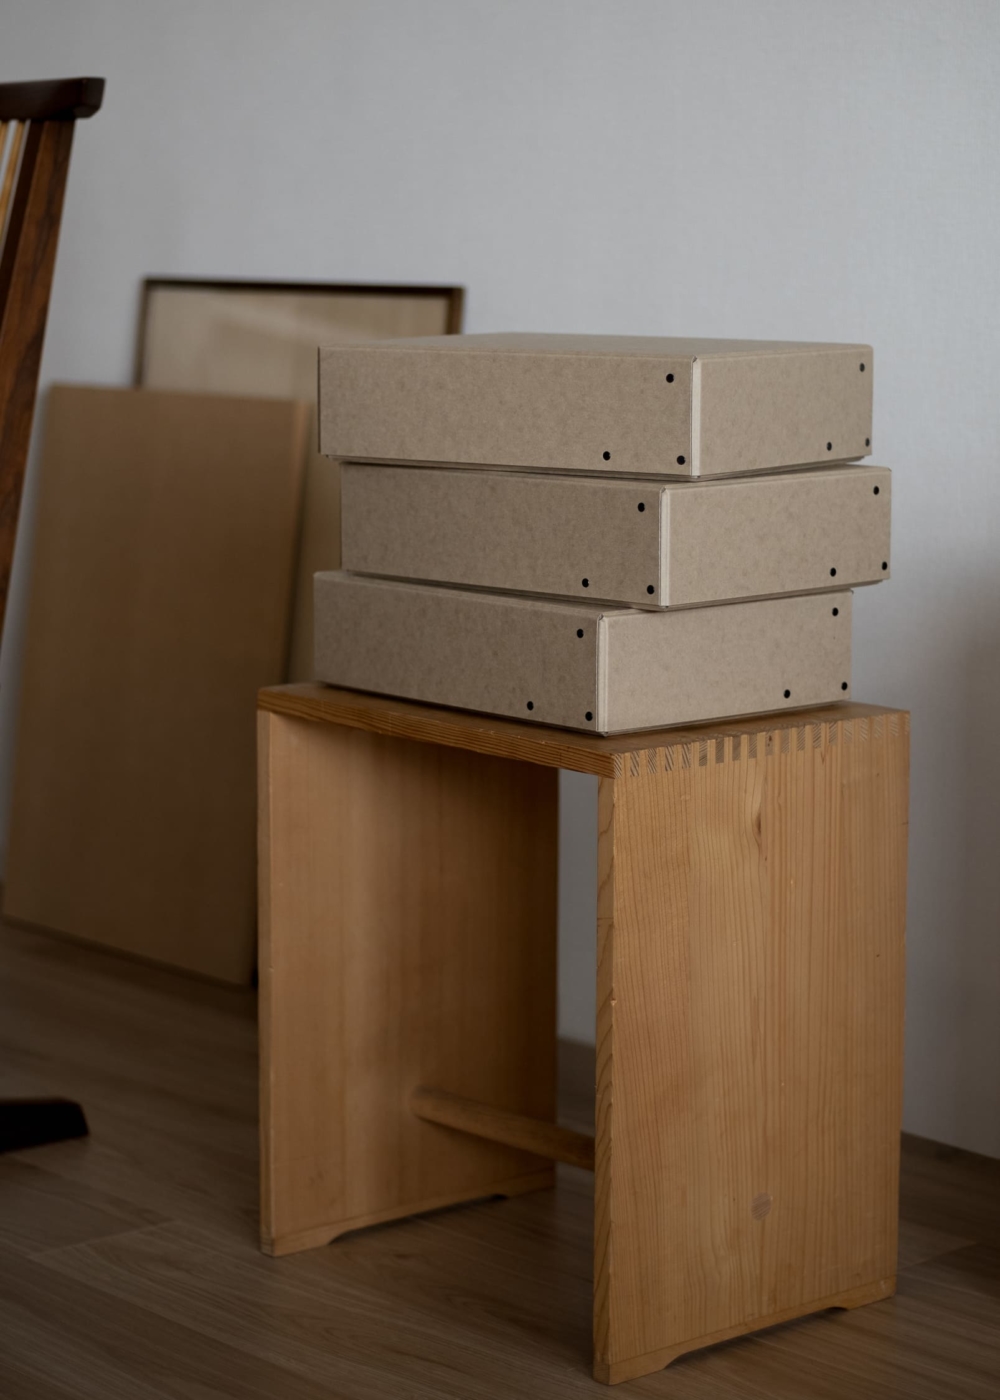 FROME Archival storage box "Rivet Box" placed on Ulm Stool by Max Bill